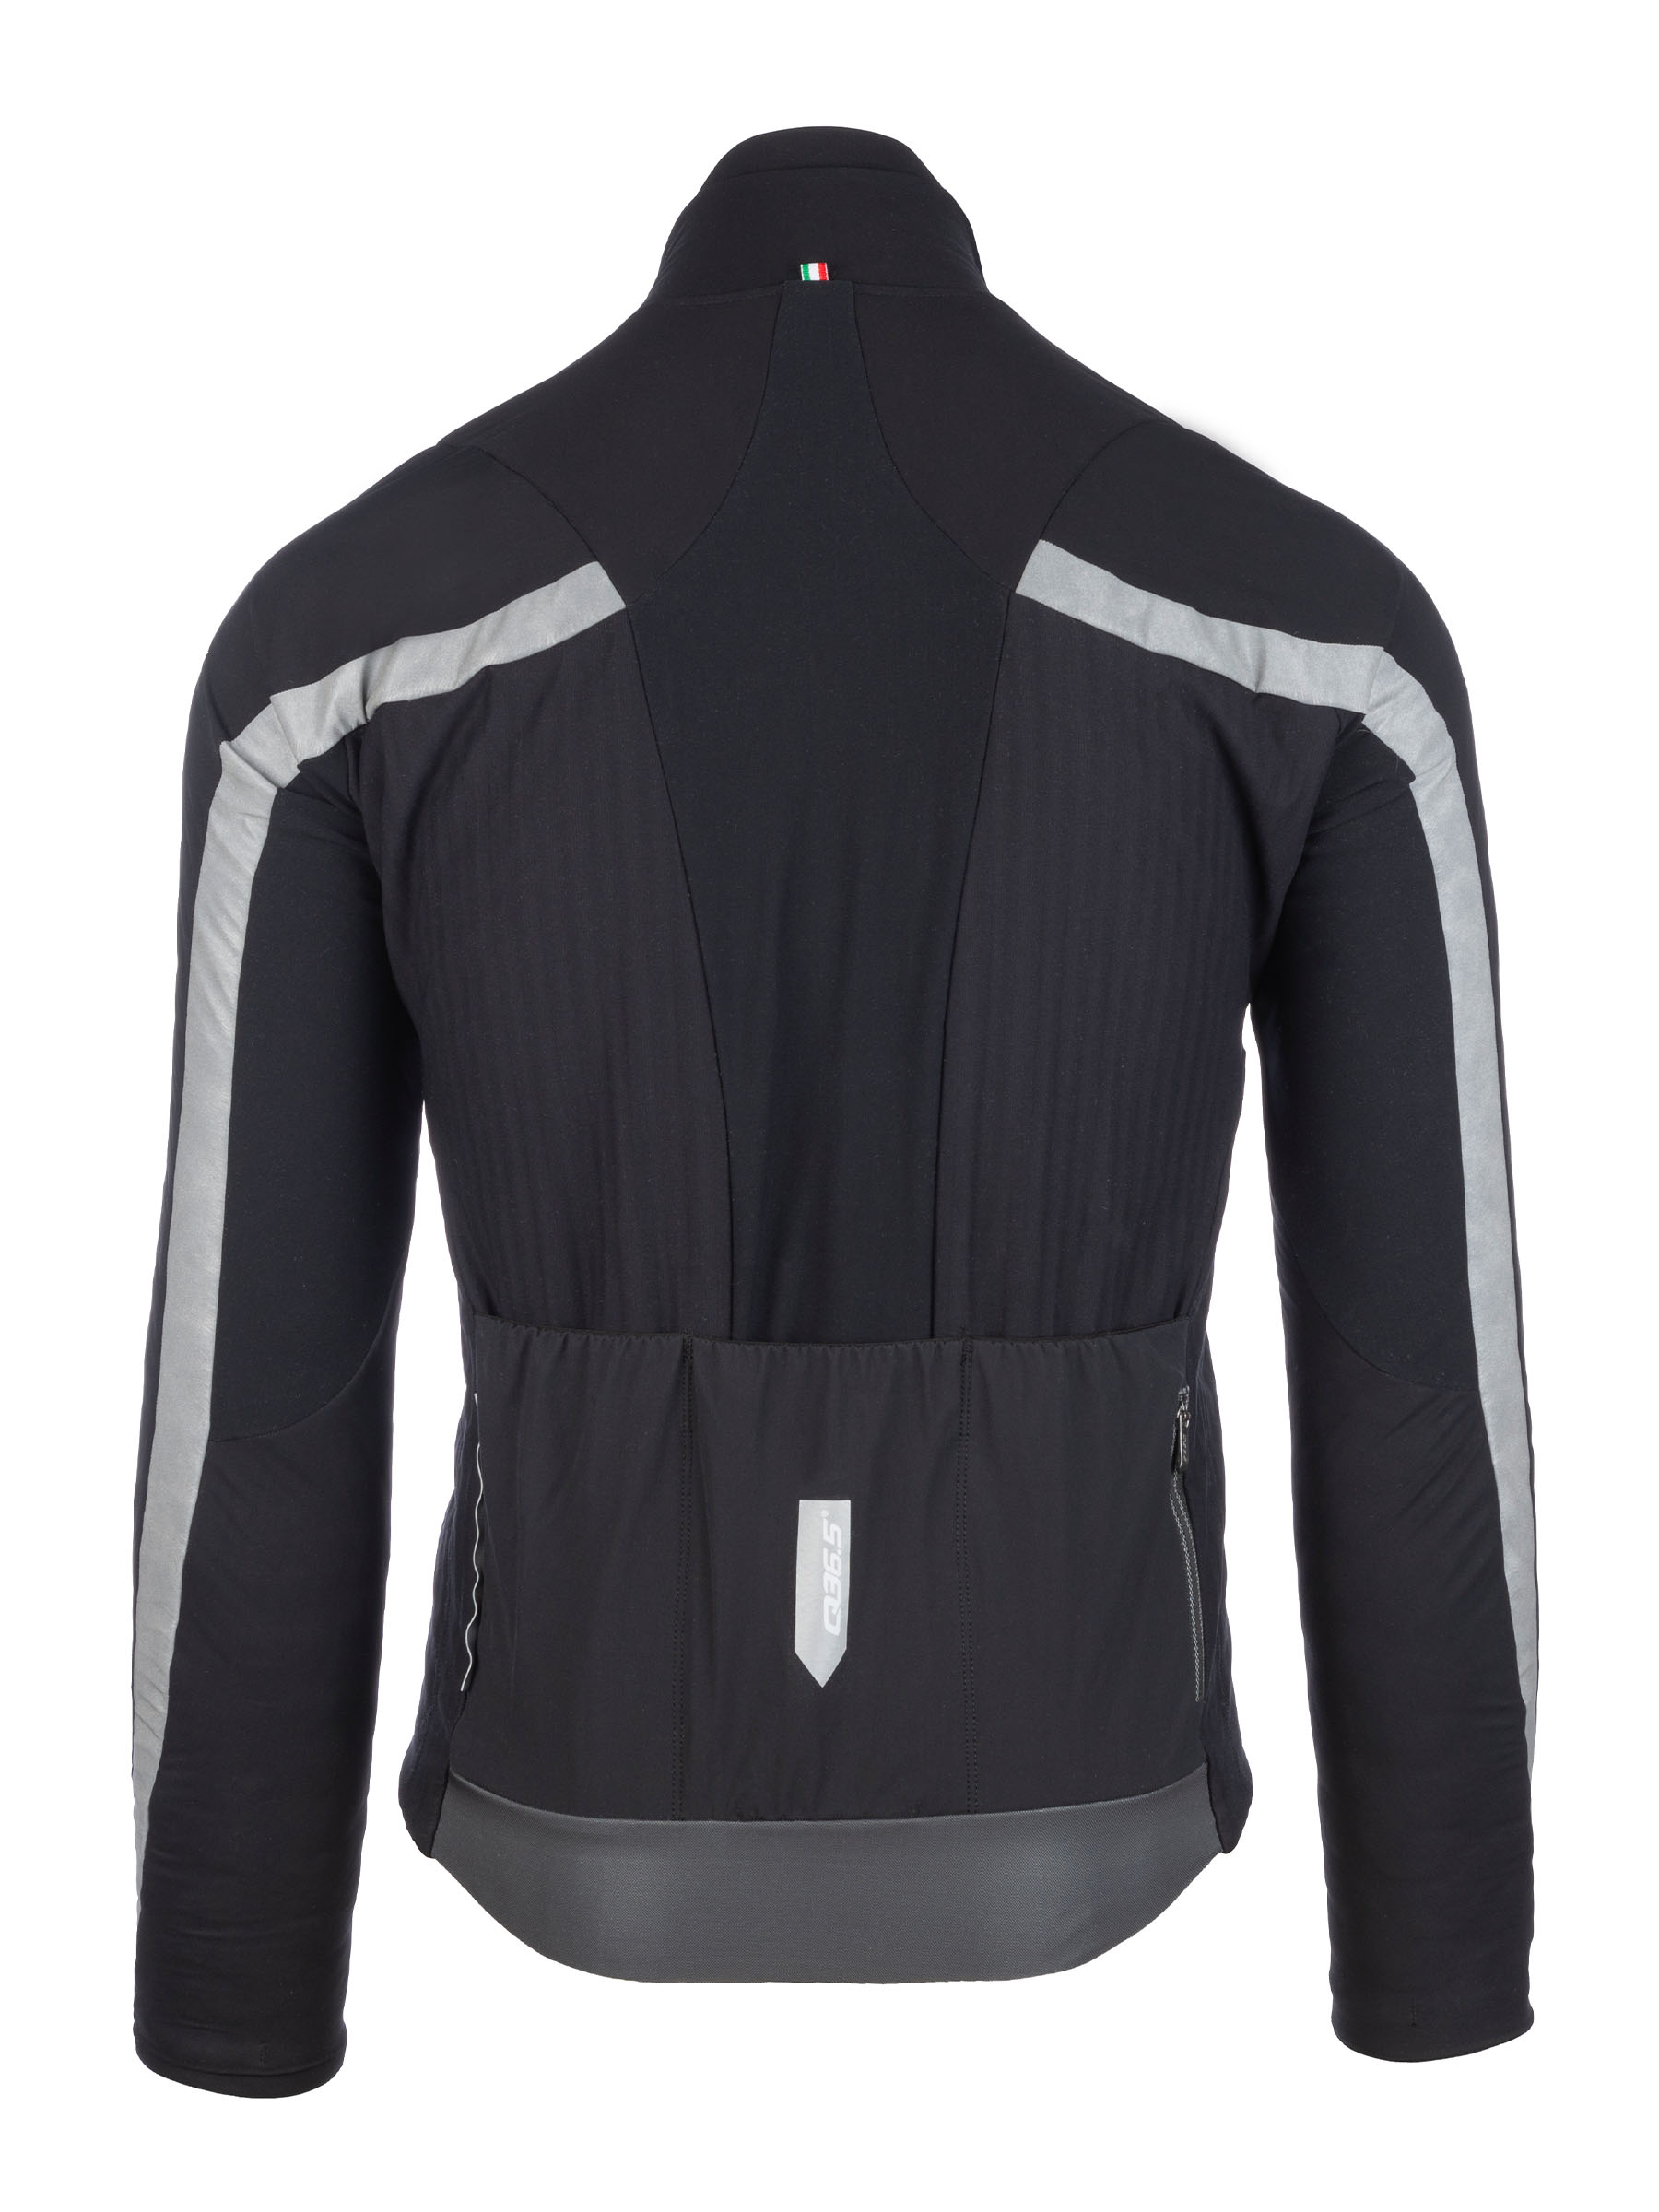 Interval Termica Jacket black, mens cycling thermal jacket for winter •